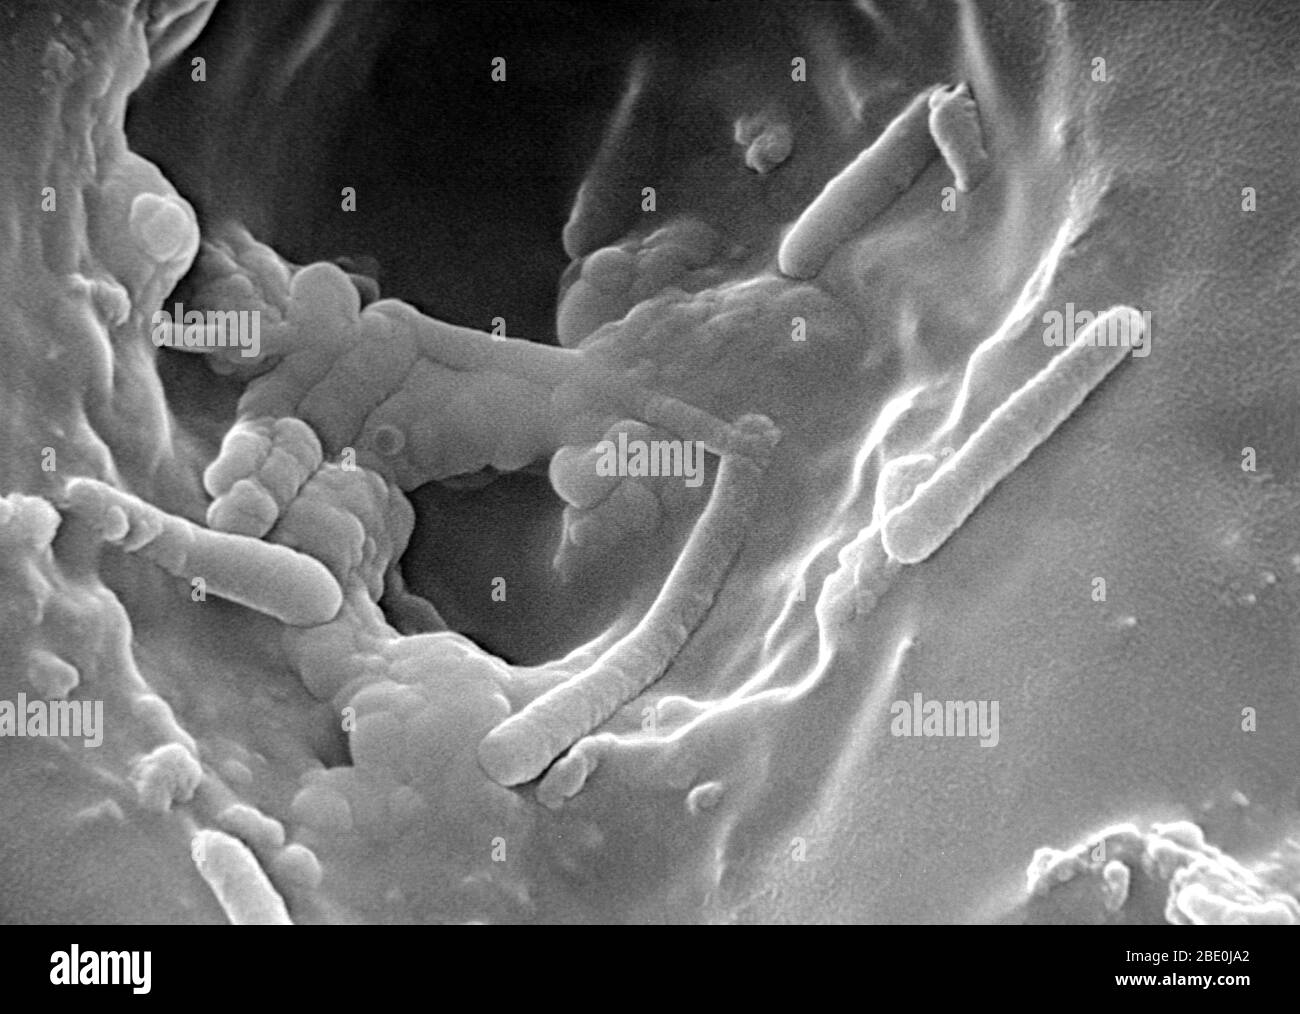 Scanning Elctron Micrograph (SEM) of Pseudomonas aeruginosa, a versatile gram-negative bacterium that grows in soil, marshes, and coastal marine habitats, as well as on plant and animal tissues. Pseudomonas aeruginosa is rod-shaped bacterium that can cause disease in plants and animals, including humans. A species of considerable medical importance, P. aeruginosa is a multidrug resistant pathogen recognised for its ubiquity, its intrinsically advanced antibiotic resistance mechanisms, and its association with serious illnesses, hospital-acquired infections such as ventilator-associated pneumon Stock Photo